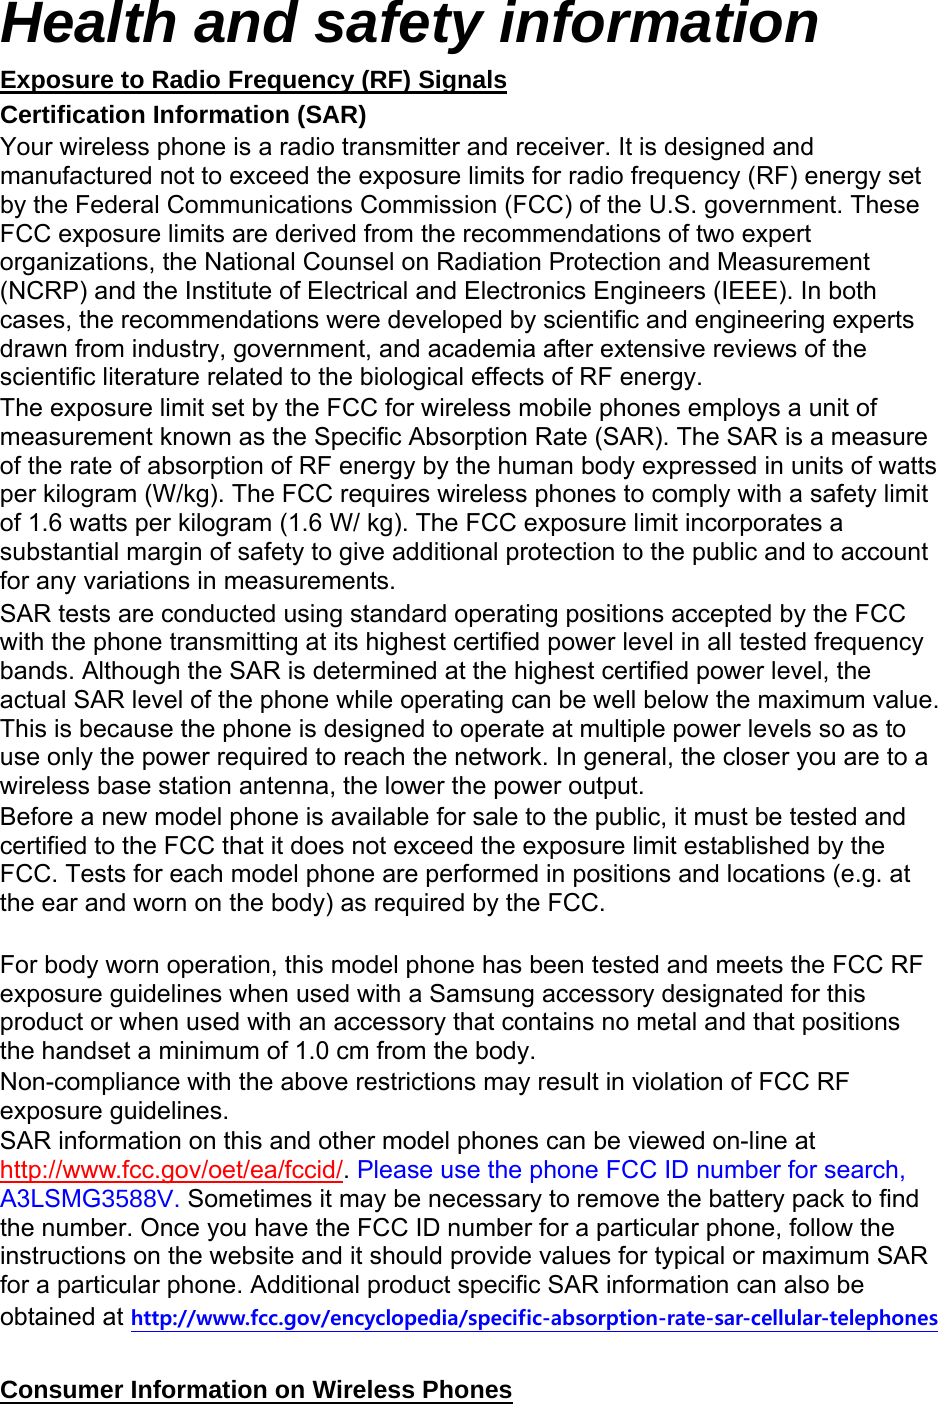 Health and safety information Exposure to Radio Frequency (RF) Signals Certification Information (SAR) Your wireless phone is a radio transmitter and receiver. It is designed and manufactured not to exceed the exposure limits for radio frequency (RF) energy set by the Federal Communications Commission (FCC) of the U.S. government. These FCC exposure limits are derived from the recommendations of two expert organizations, the National Counsel on Radiation Protection and Measurement (NCRP) and the Institute of Electrical and Electronics Engineers (IEEE). In both cases, the recommendations were developed by scientific and engineering experts drawn from industry, government, and academia after extensive reviews of the scientific literature related to the biological effects of RF energy. The exposure limit set by the FCC for wireless mobile phones employs a unit of measurement known as the Specific Absorption Rate (SAR). The SAR is a measure of the rate of absorption of RF energy by the human body expressed in units of watts per kilogram (W/kg). The FCC requires wireless phones to comply with a safety limit of 1.6 watts per kilogram (1.6 W/ kg). The FCC exposure limit incorporates a substantial margin of safety to give additional protection to the public and to account for any variations in measurements. SAR tests are conducted using standard operating positions accepted by the FCC with the phone transmitting at its highest certified power level in all tested frequency bands. Although the SAR is determined at the highest certified power level, the actual SAR level of the phone while operating can be well below the maximum value. This is because the phone is designed to operate at multiple power levels so as to use only the power required to reach the network. In general, the closer you are to a wireless base station antenna, the lower the power output. Before a new model phone is available for sale to the public, it must be tested and certified to the FCC that it does not exceed the exposure limit established by the FCC. Tests for each model phone are performed in positions and locations (e.g. at the ear and worn on the body) as required by the FCC.      For body worn operation, this model phone has been tested and meets the FCC RF exposure guidelines when used with a Samsung accessory designated for this product or when used with an accessory that contains no metal and that positions the handset a minimum of 1.0 cm from the body.   Non-compliance with the above restrictions may result in violation of FCC RF exposure guidelines. SAR information on this and other model phones can be viewed on-line at http://www.fcc.gov/oet/ea/fccid/. Please use the phone FCC ID number for search, A3LSMG9. Sometimes it may be necessary to remove the battery pack to find the number. Once you have the FCC ID number for a particular phone, follow the instructions on the website and it should provide values for typical or maximum SAR for a particular phone. Additional product specific SAR information can also be obtained at http://www.fcc.gov/encyclopedia/specific-absorption-rate-sar-cellular-telephones  Consumer Information on Wireless Phones 